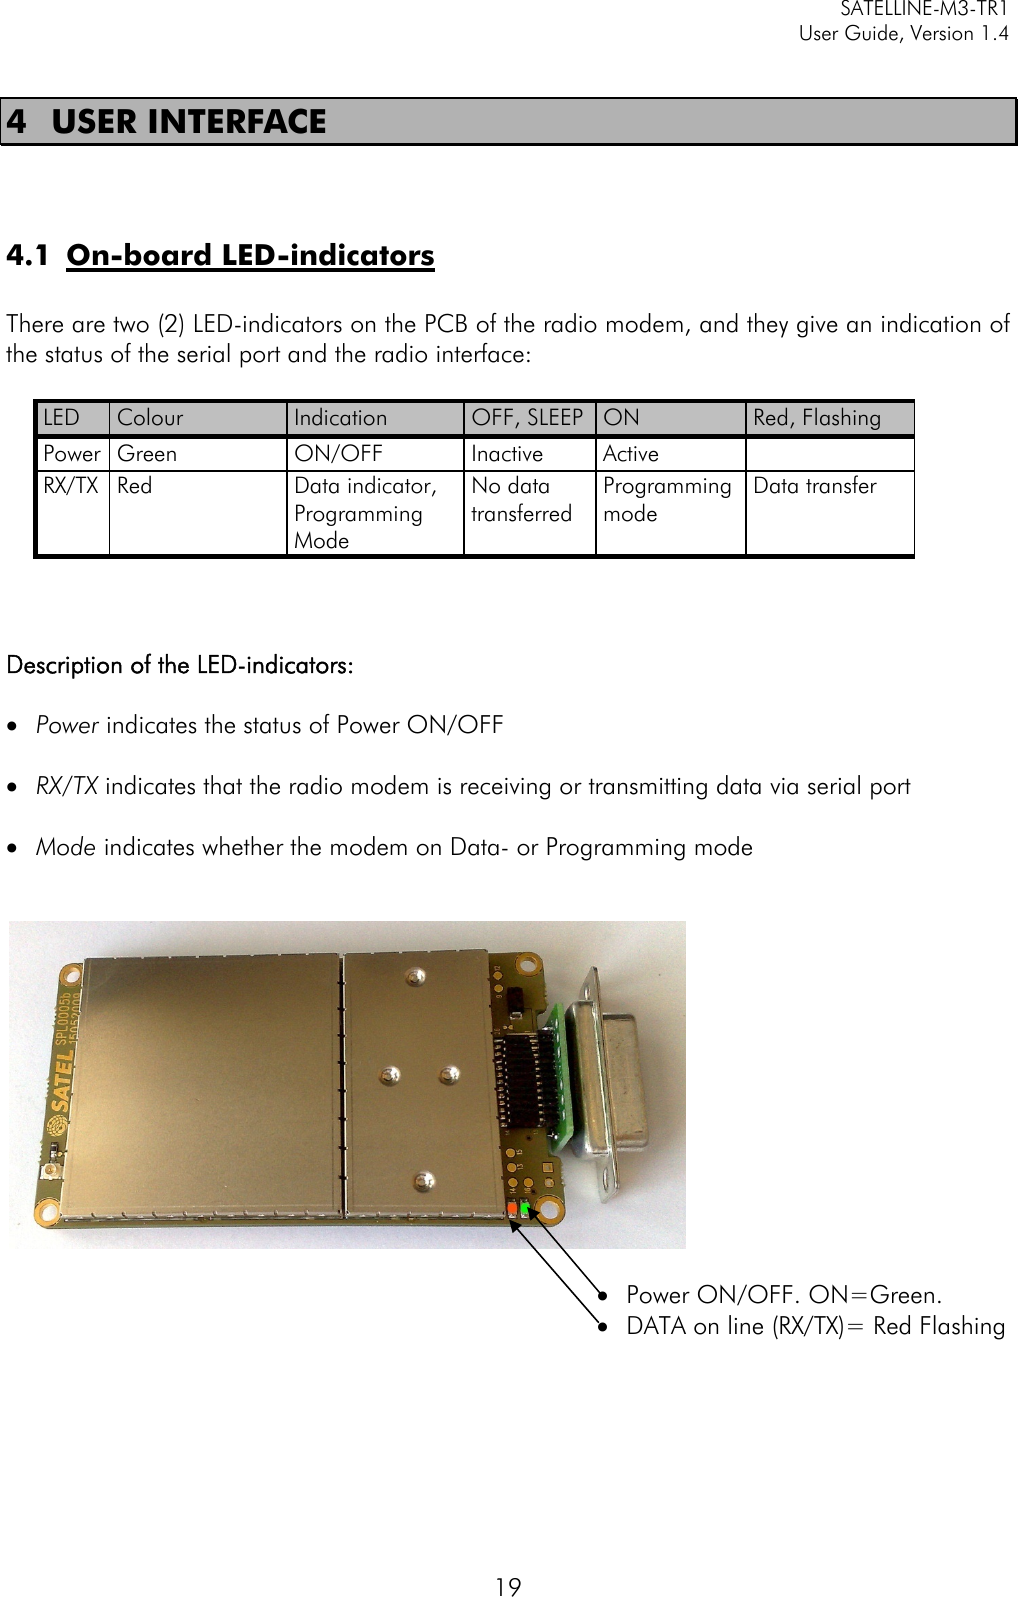   SATELLINE-M3-TR1     User Guide, Version 1.4   19 4 USER INTERFACE    4.1 On-board LED-indicators  There are two (2) LED-indicators on the PCB of the radio modem, and they give an indication of the status of the serial port and the radio interface:  LED Colour Indication OFF, SLEEP ON Red, Flashing Power Green ON/OFF Inactive Active  RX/TX Red Data indicator, Programming Mode No data transferred Programming mode Data transfer    Description of the LED-indicators:  • Power indicates the status of Power ON/OFF   • RX/TX indicates that the radio modem is receiving or transmitting data via serial port  • Mode indicates whether the modem on Data- or Programming mode     • Power ON/OFF. ON=Green. • DATA on line (RX/TX)= Red Flashing       